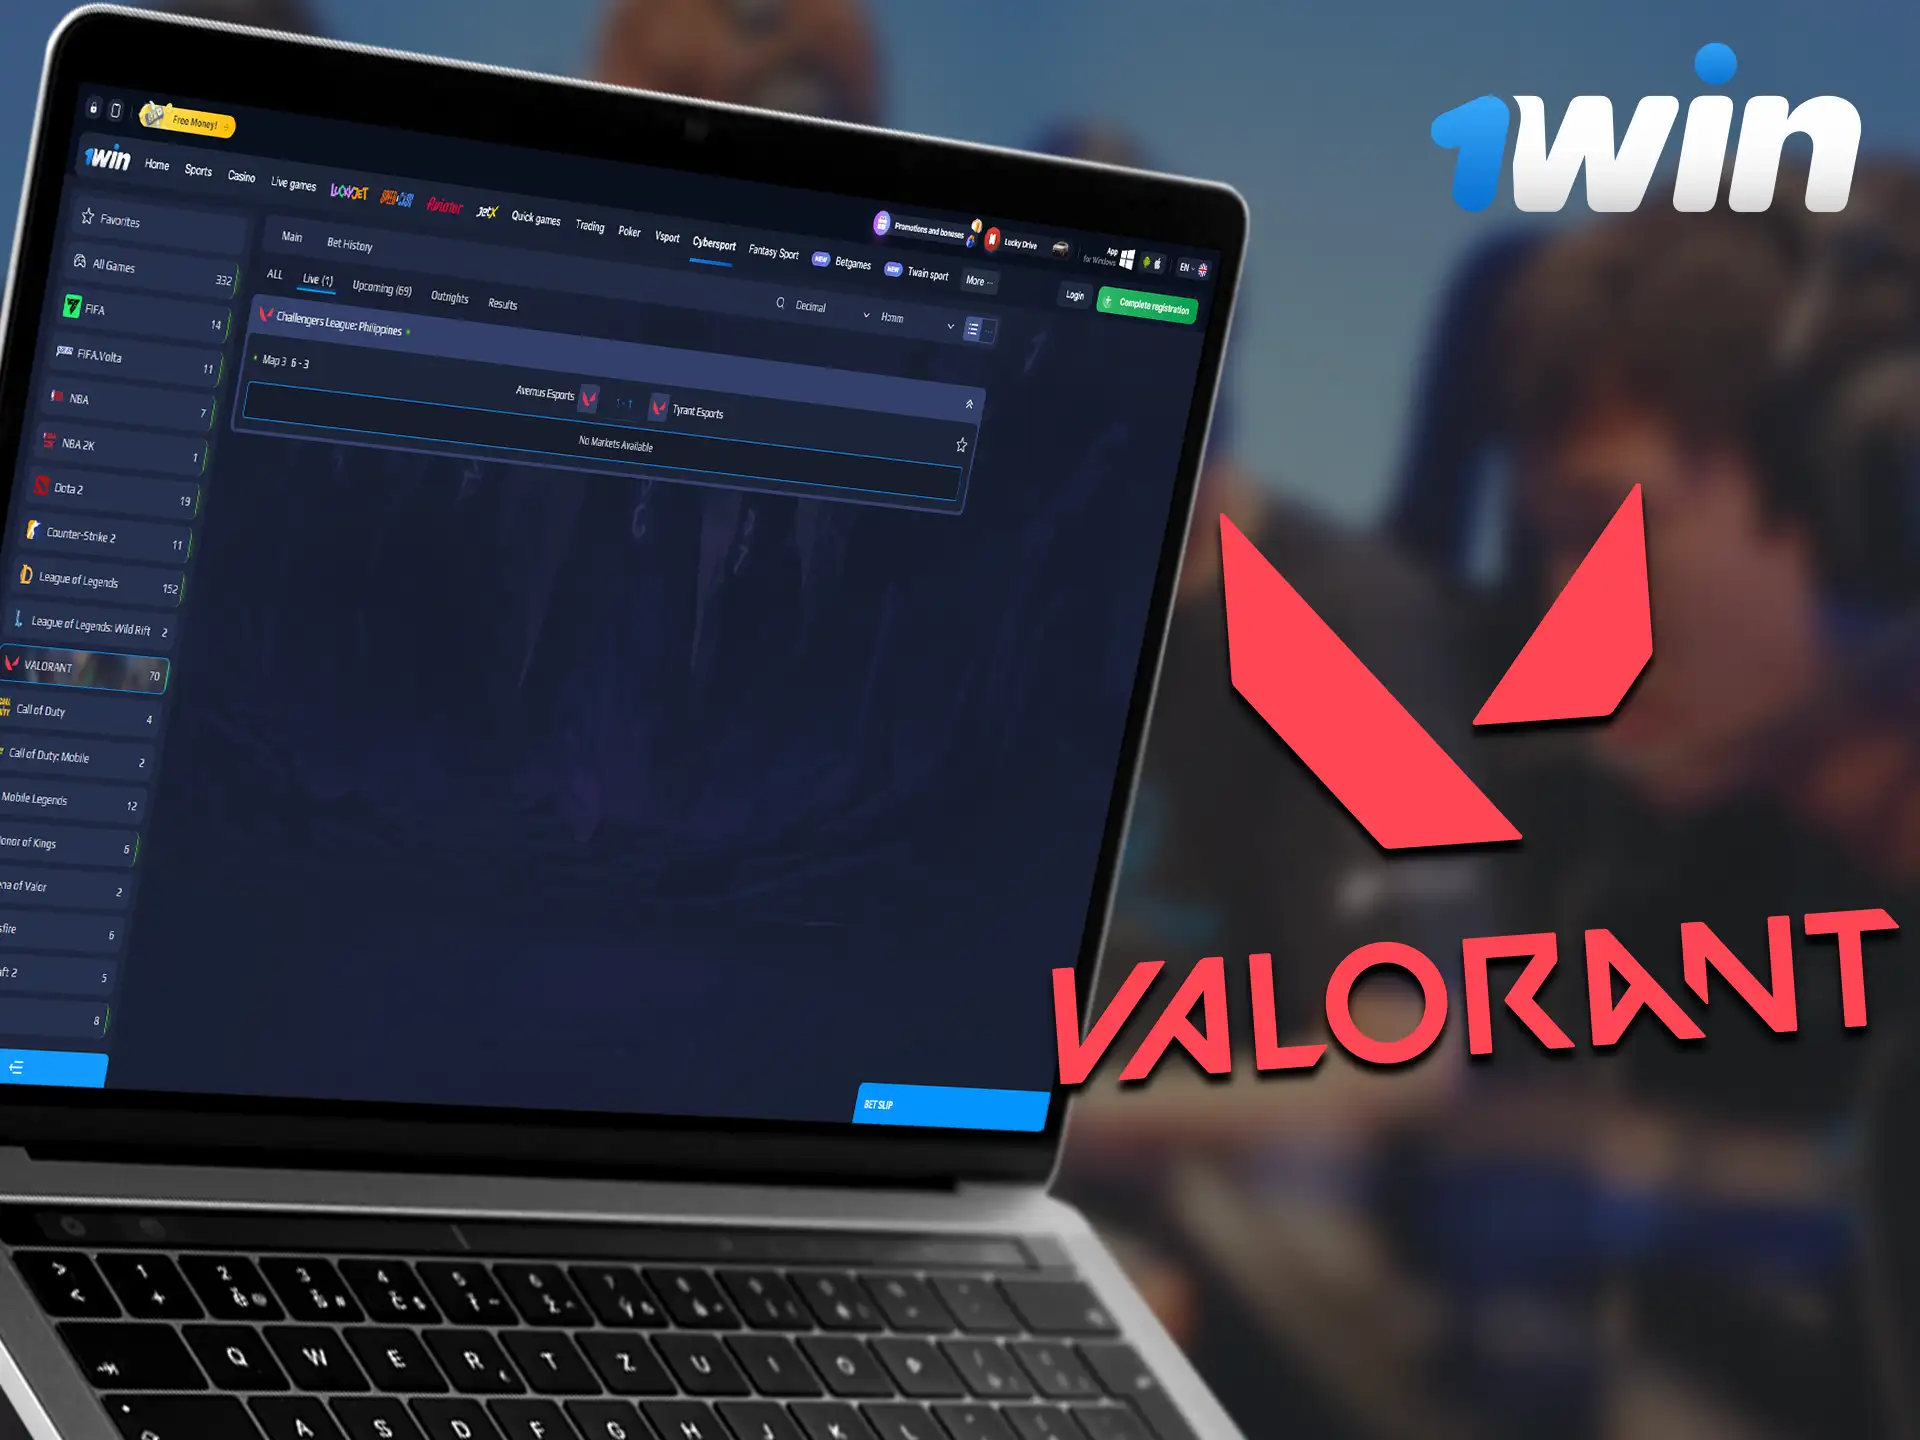 1Win offers Valorant fans the opportunity to follow and bet on the major tournaments.